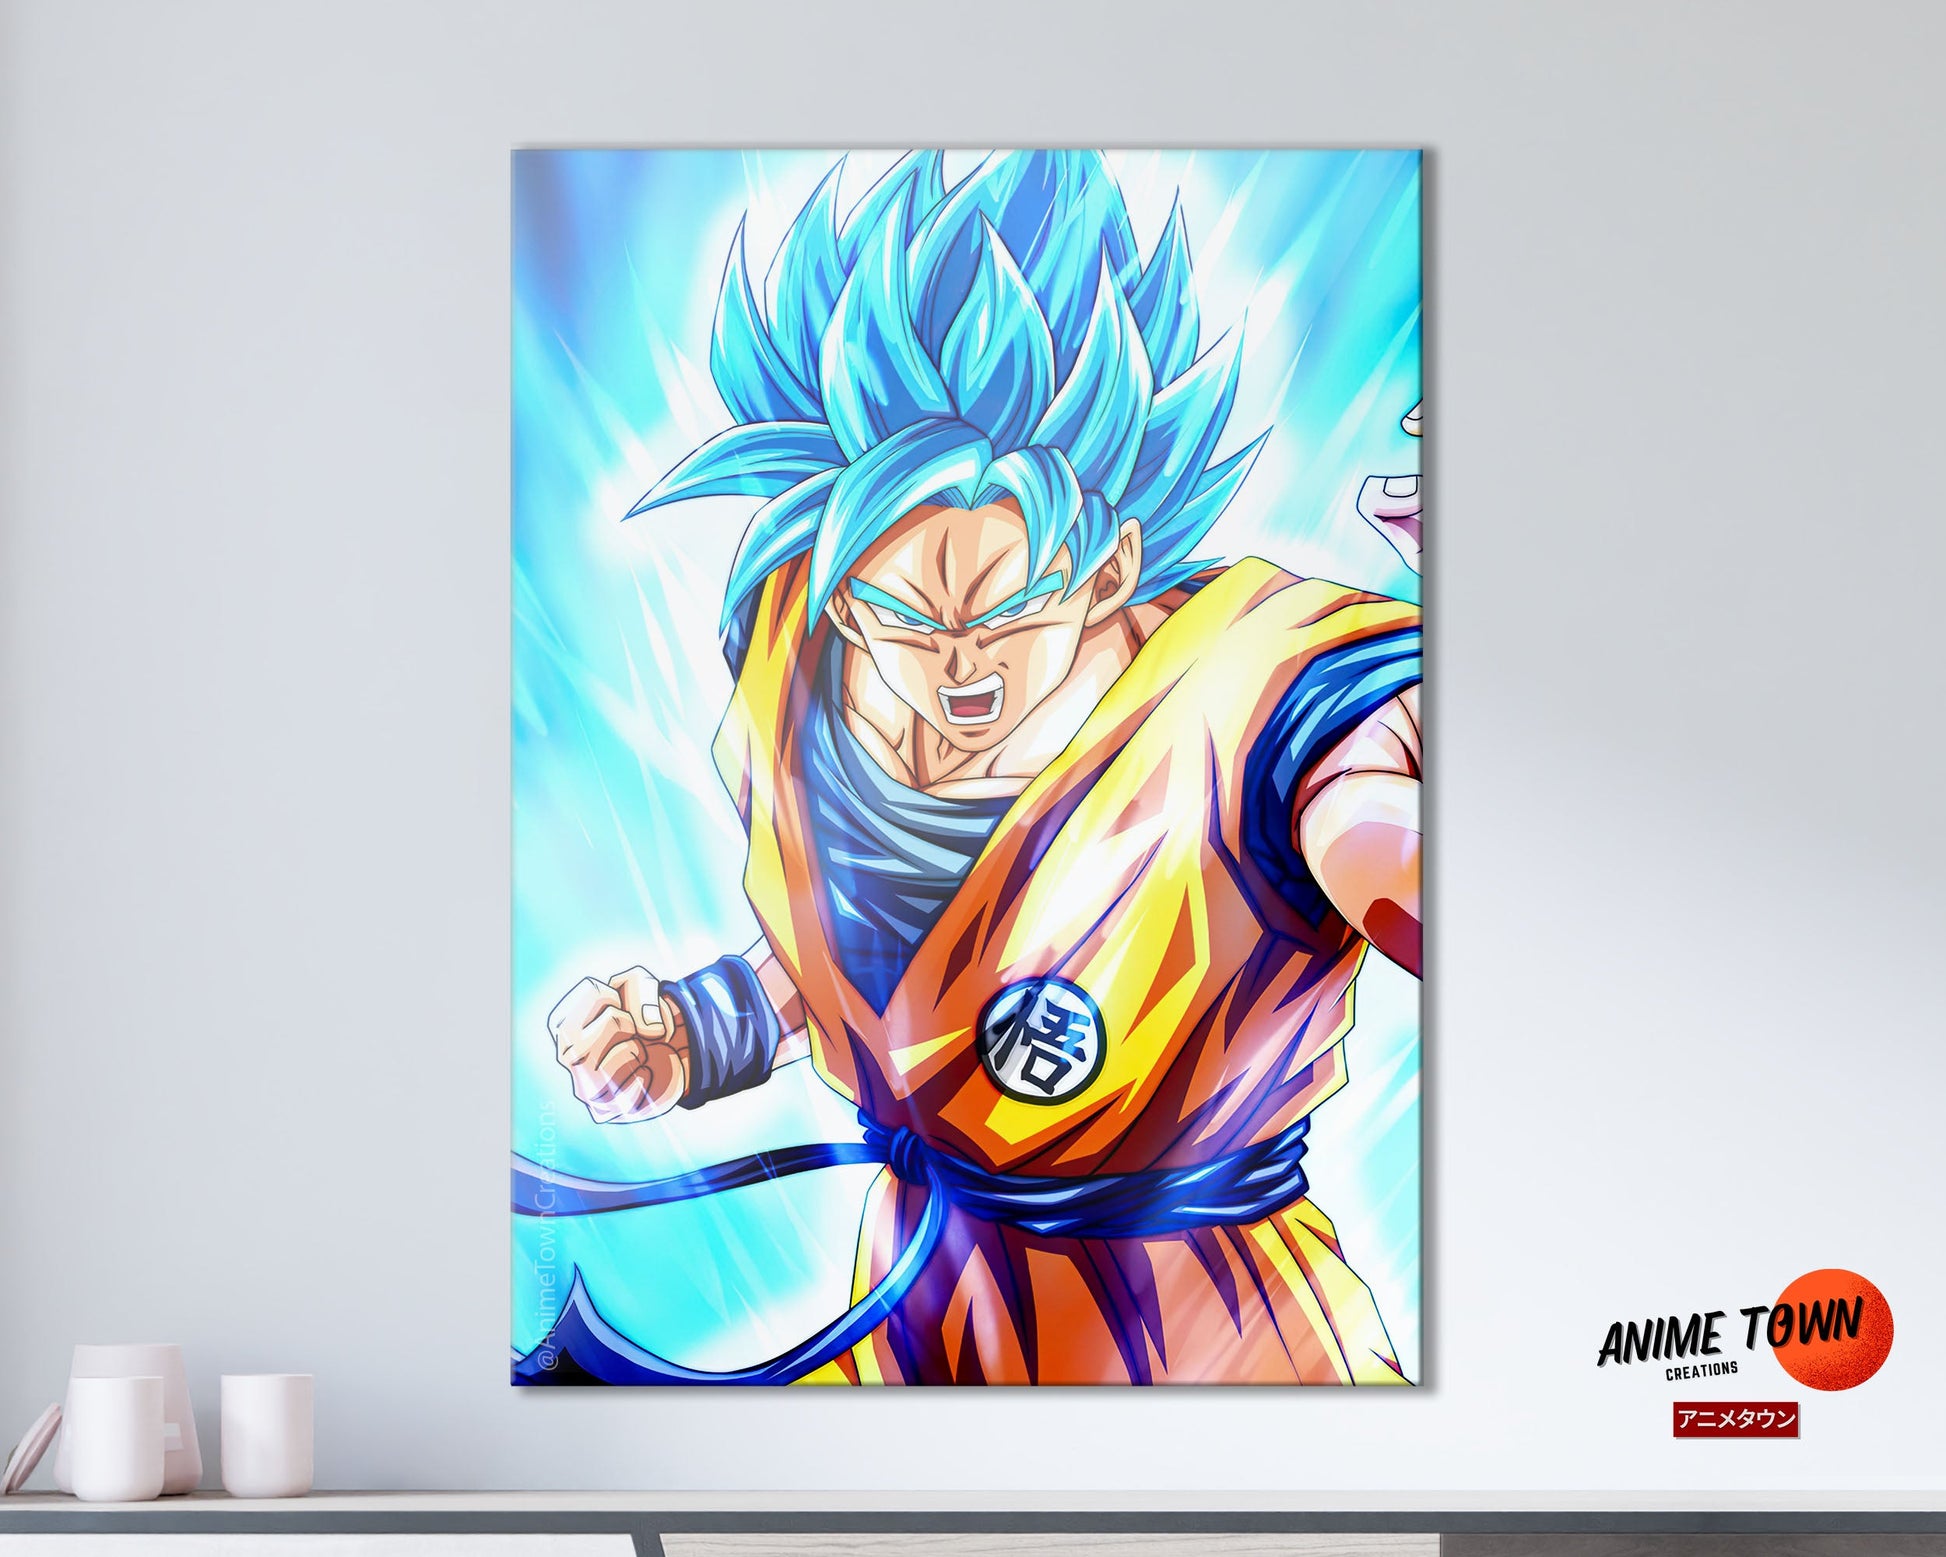 Displate - Goku Poster made out of Metal. Share or tag a